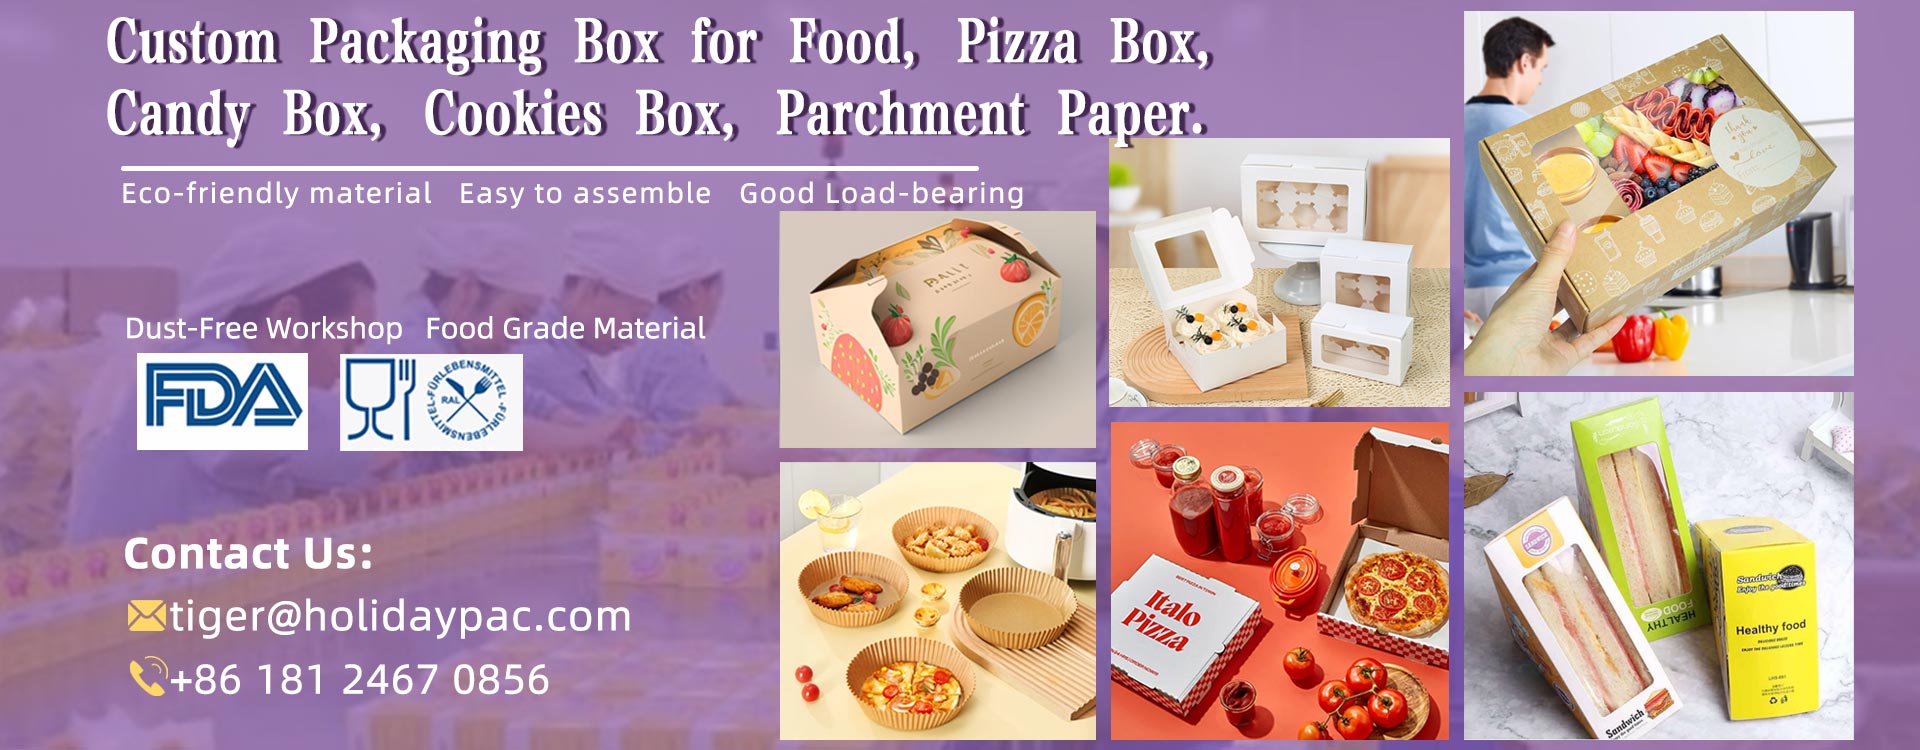 Custom Packaging Box for Food Pizza BoxCandy Box Cookies Box Parchment Paper